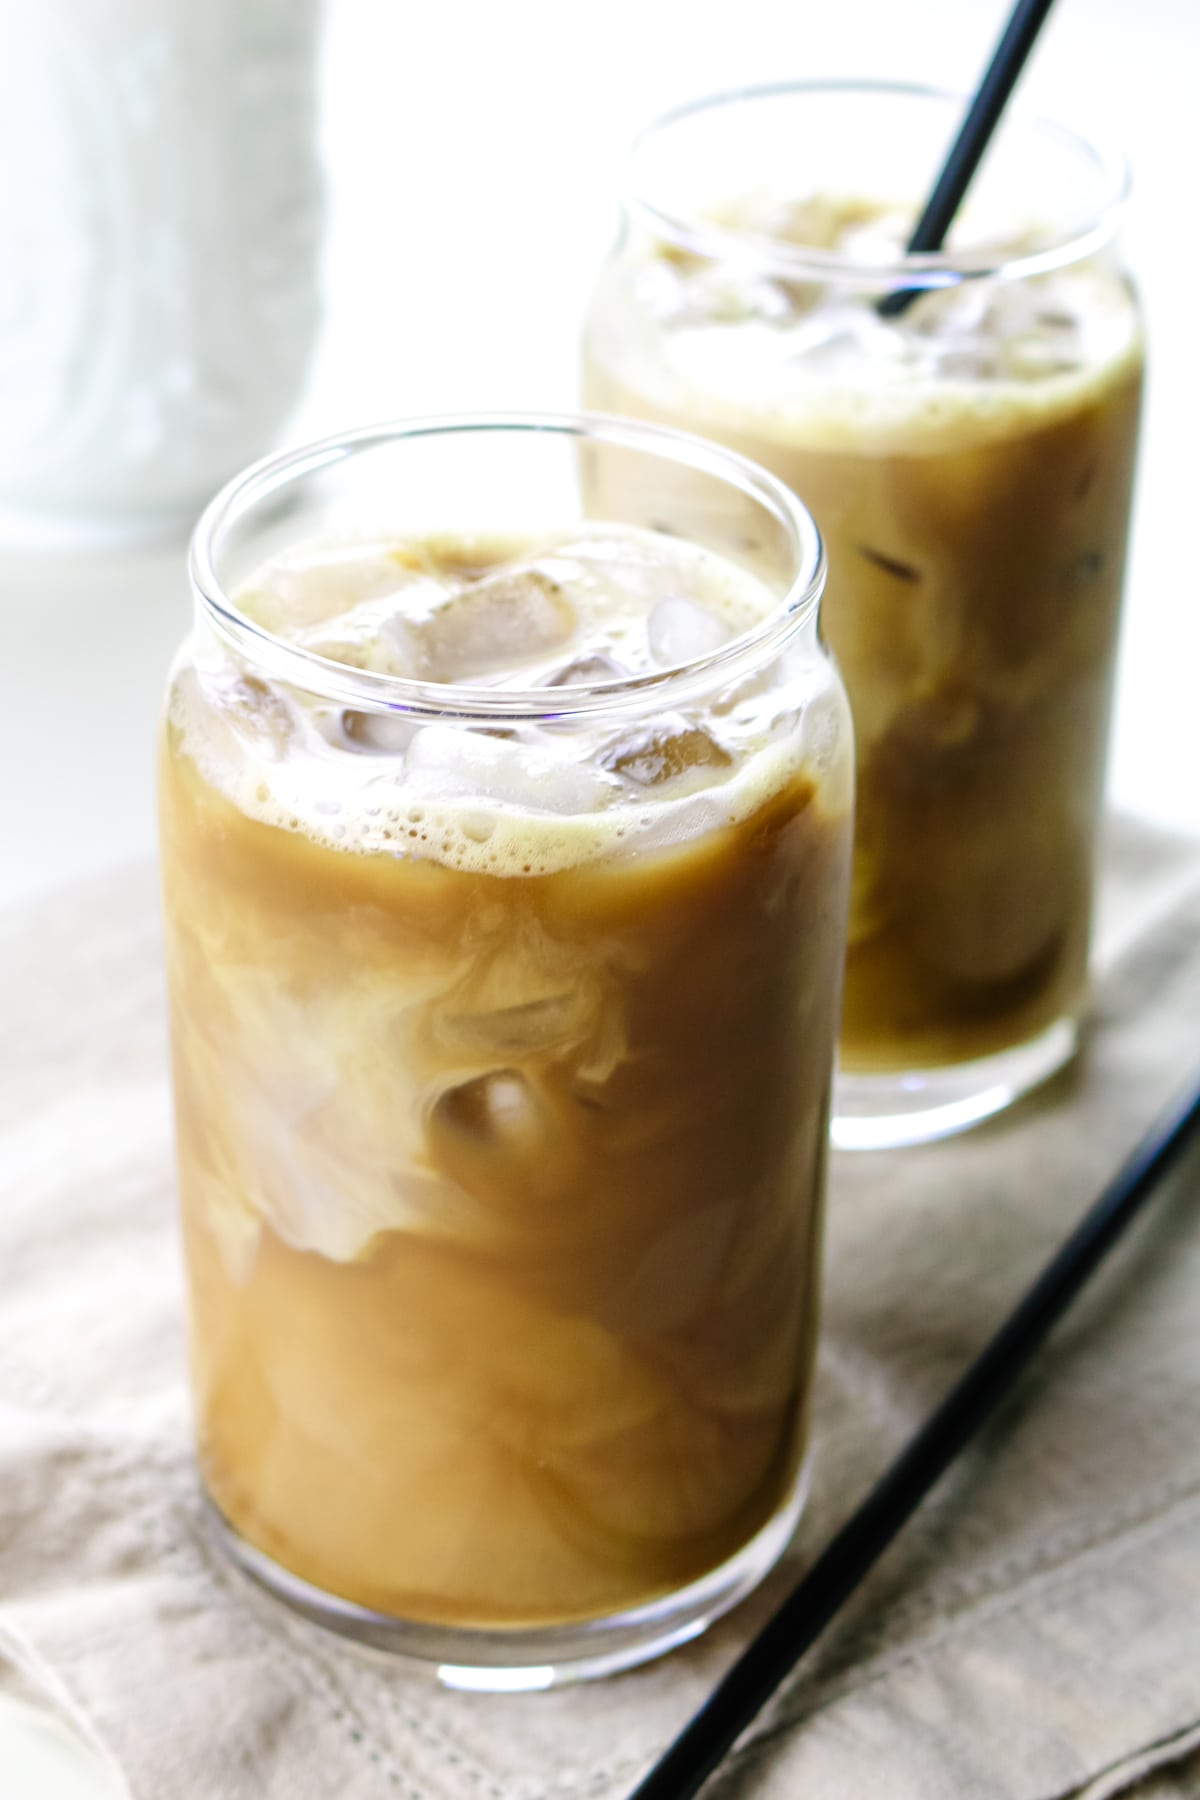 iced coffee with white swirls from milk in a glass on nude linen.